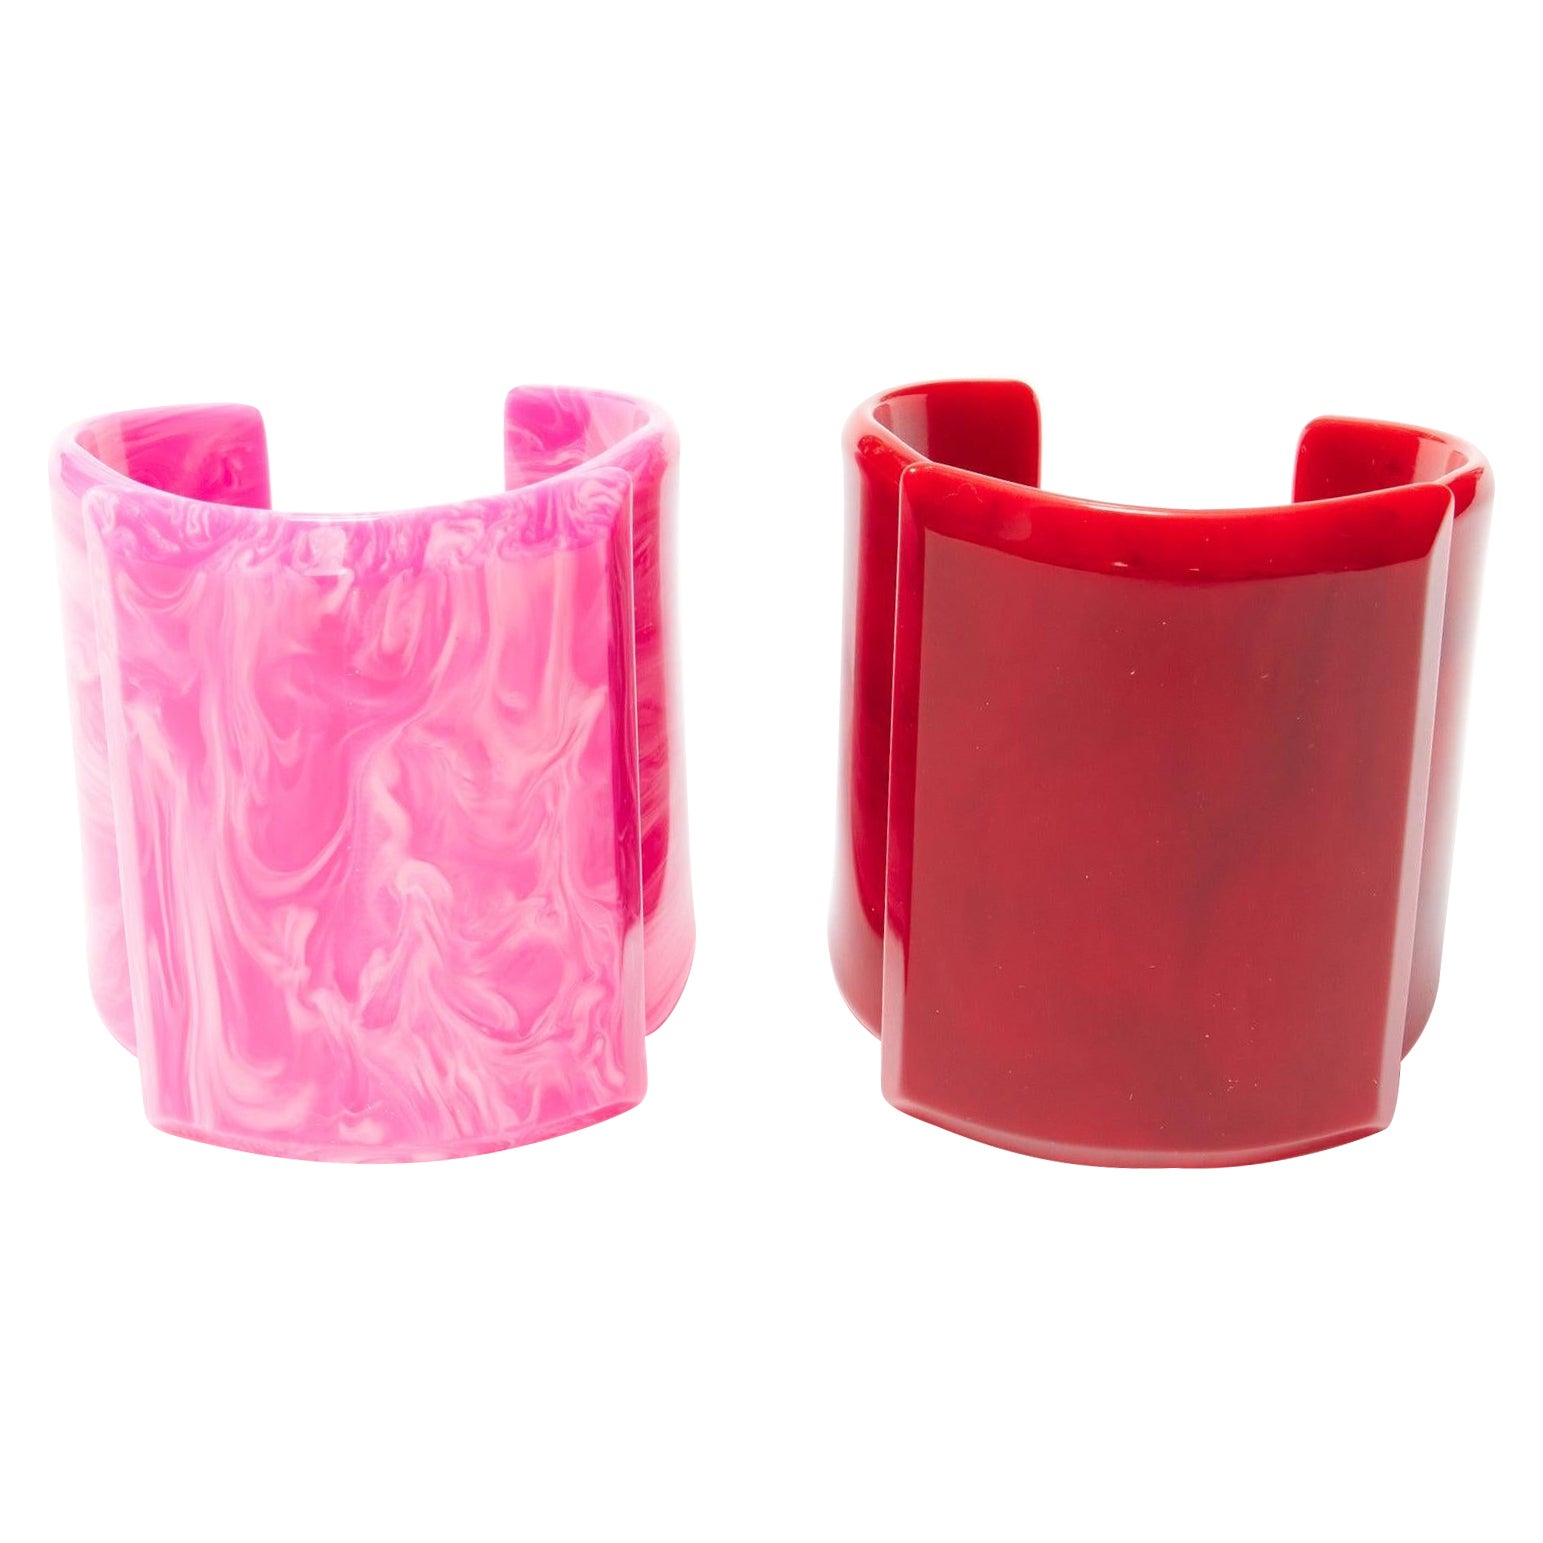 TOGA ARCHIVES pink red acrylic marble swirl oversized cuffs set For Sale